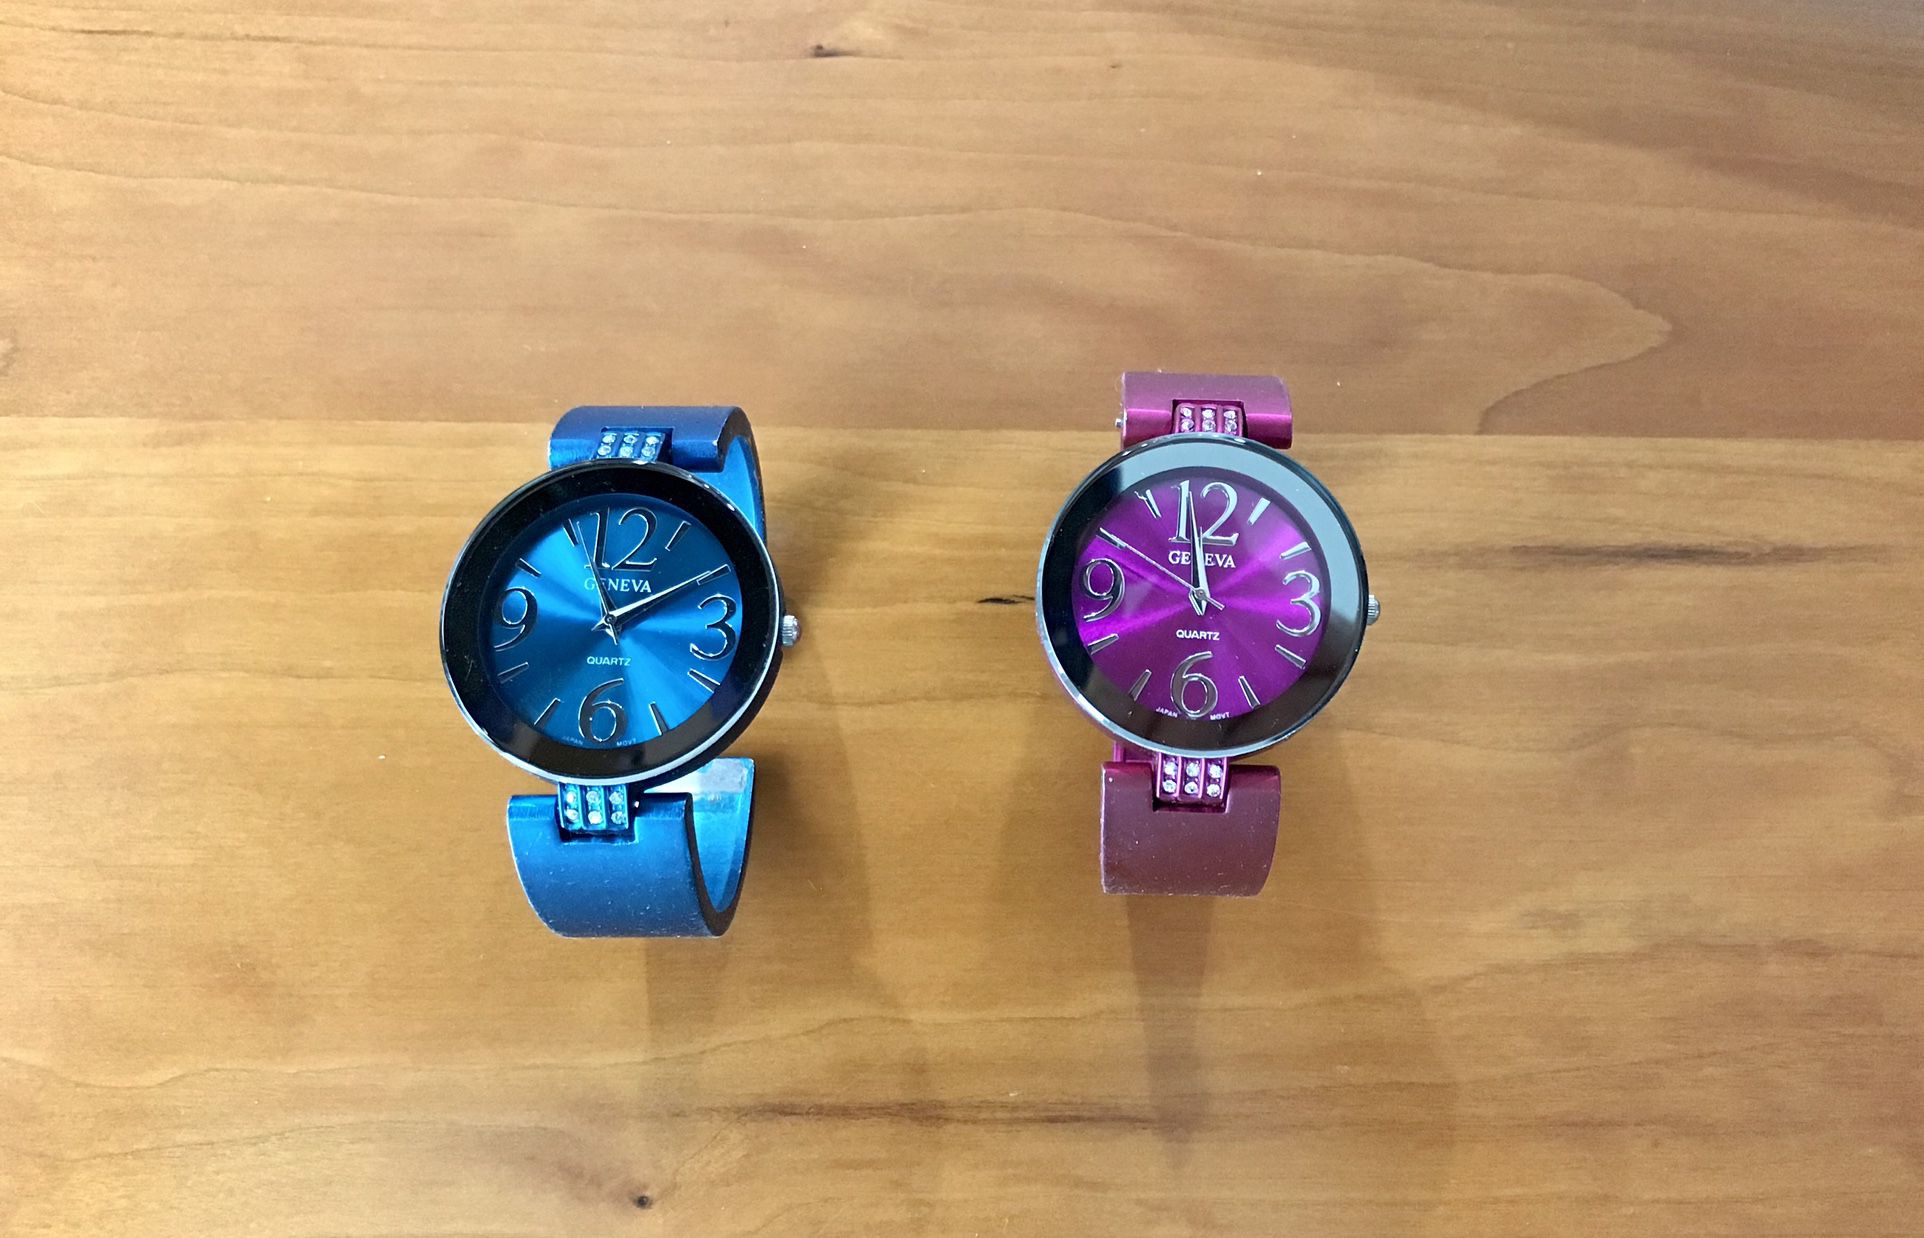 Turquoise & Magenta Cuff Style Watches 